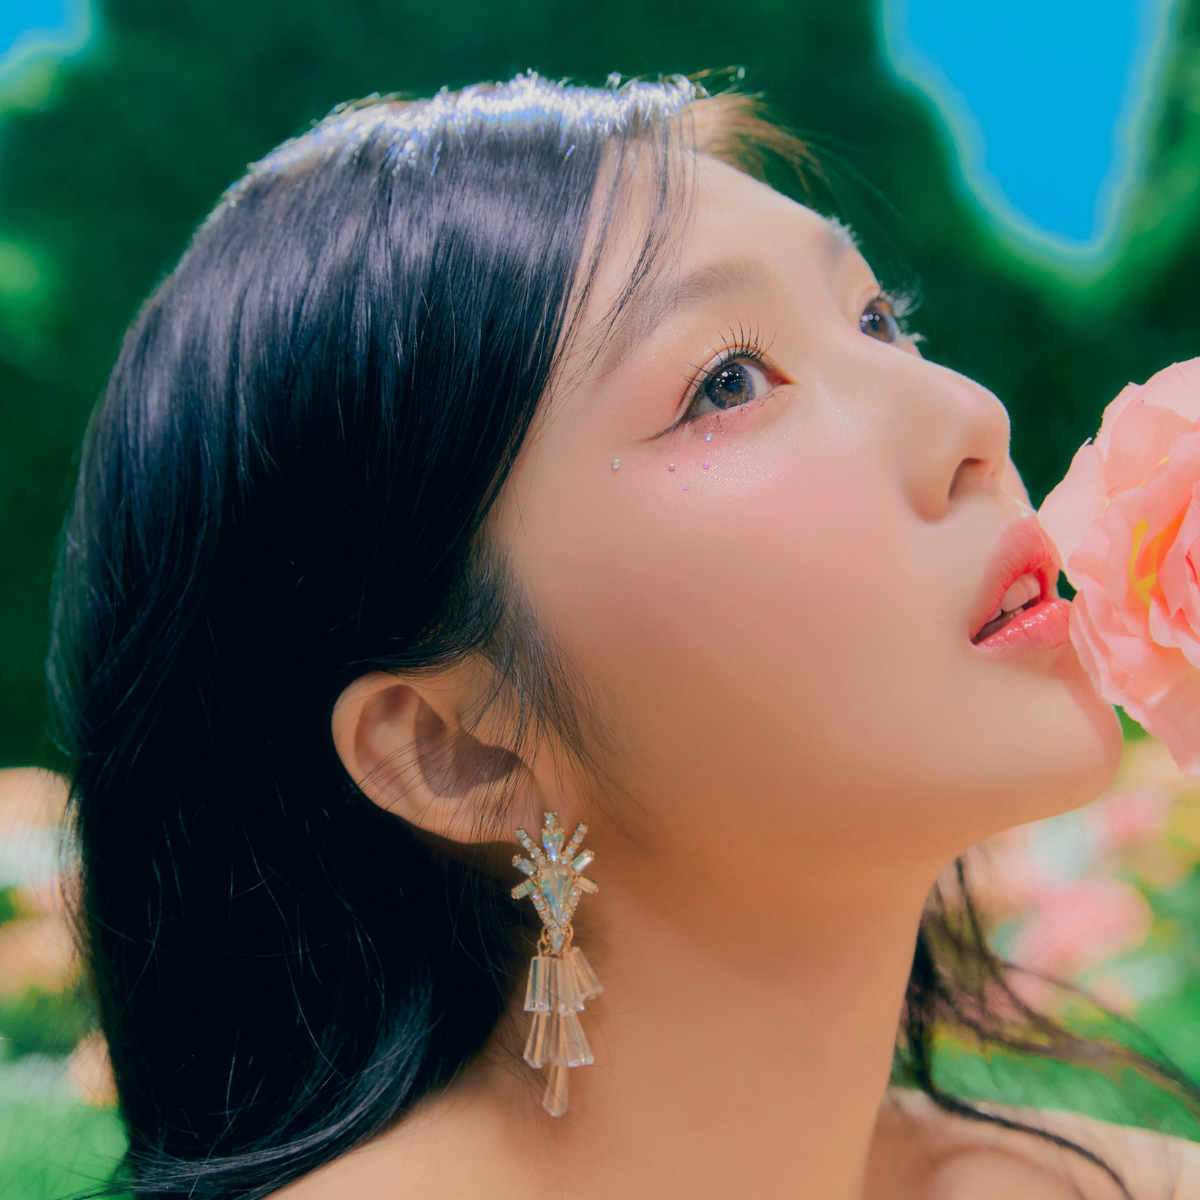 Red Velvet's Joy and Seulgi exude royalty and femininity in new concept photo for upcoming album